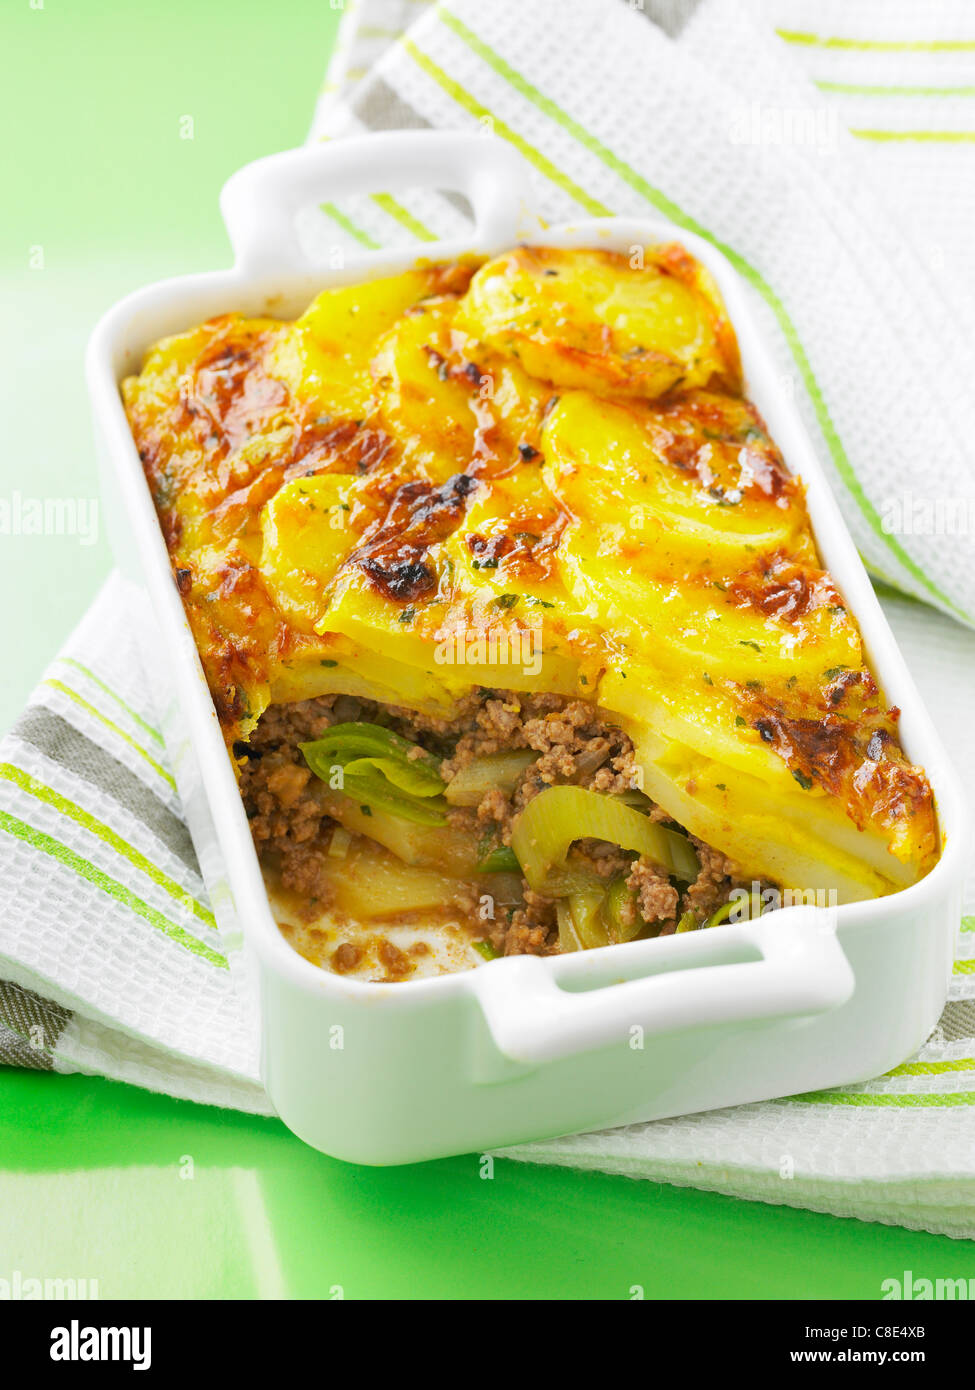 Leek,potato and minced beef cheese-topped dish Stock Photo